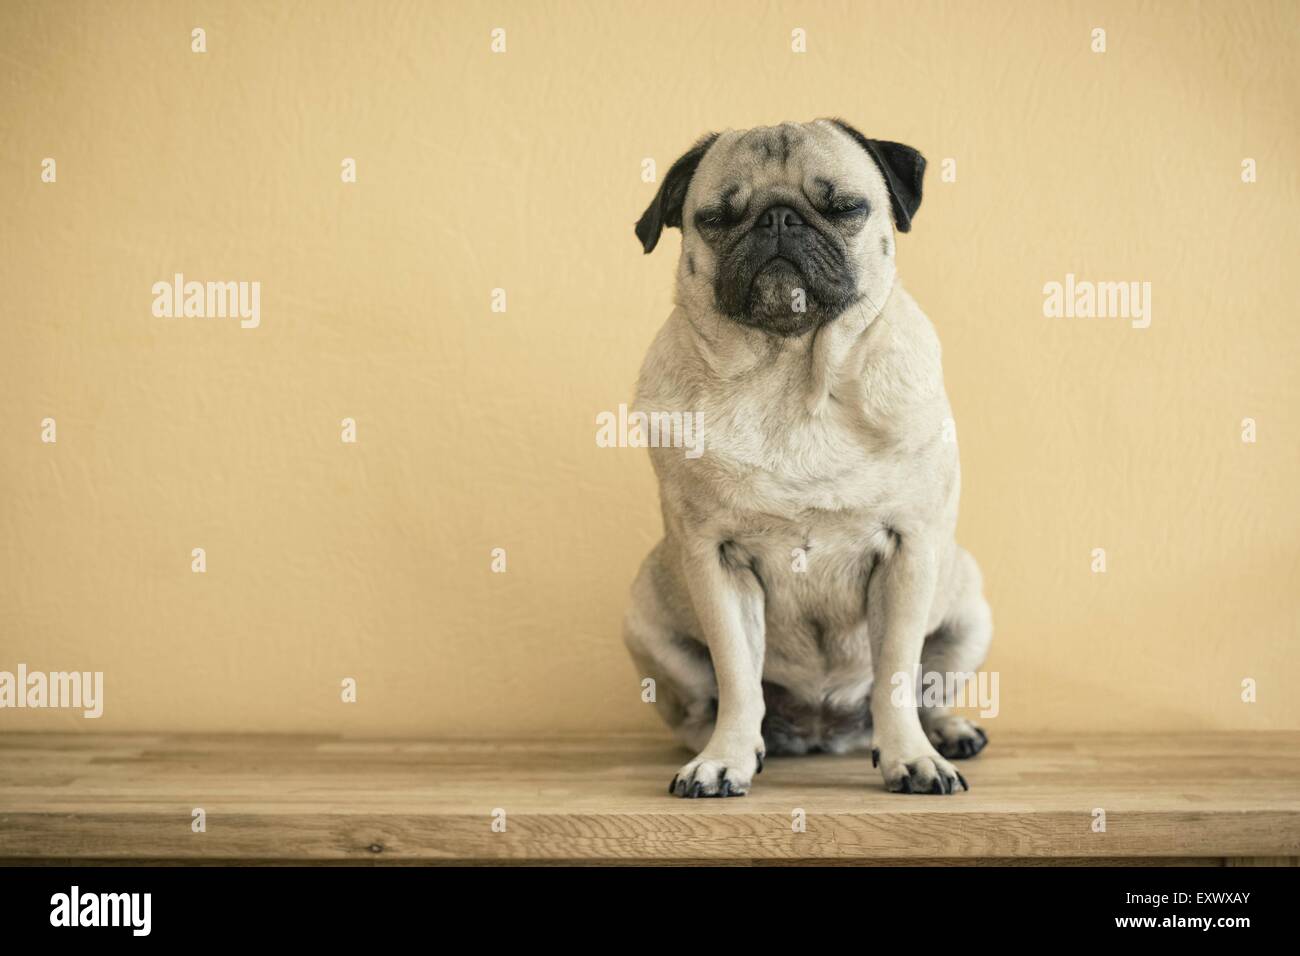 Pug dog sitting with closed eyes on a wooden bench Stock Photo